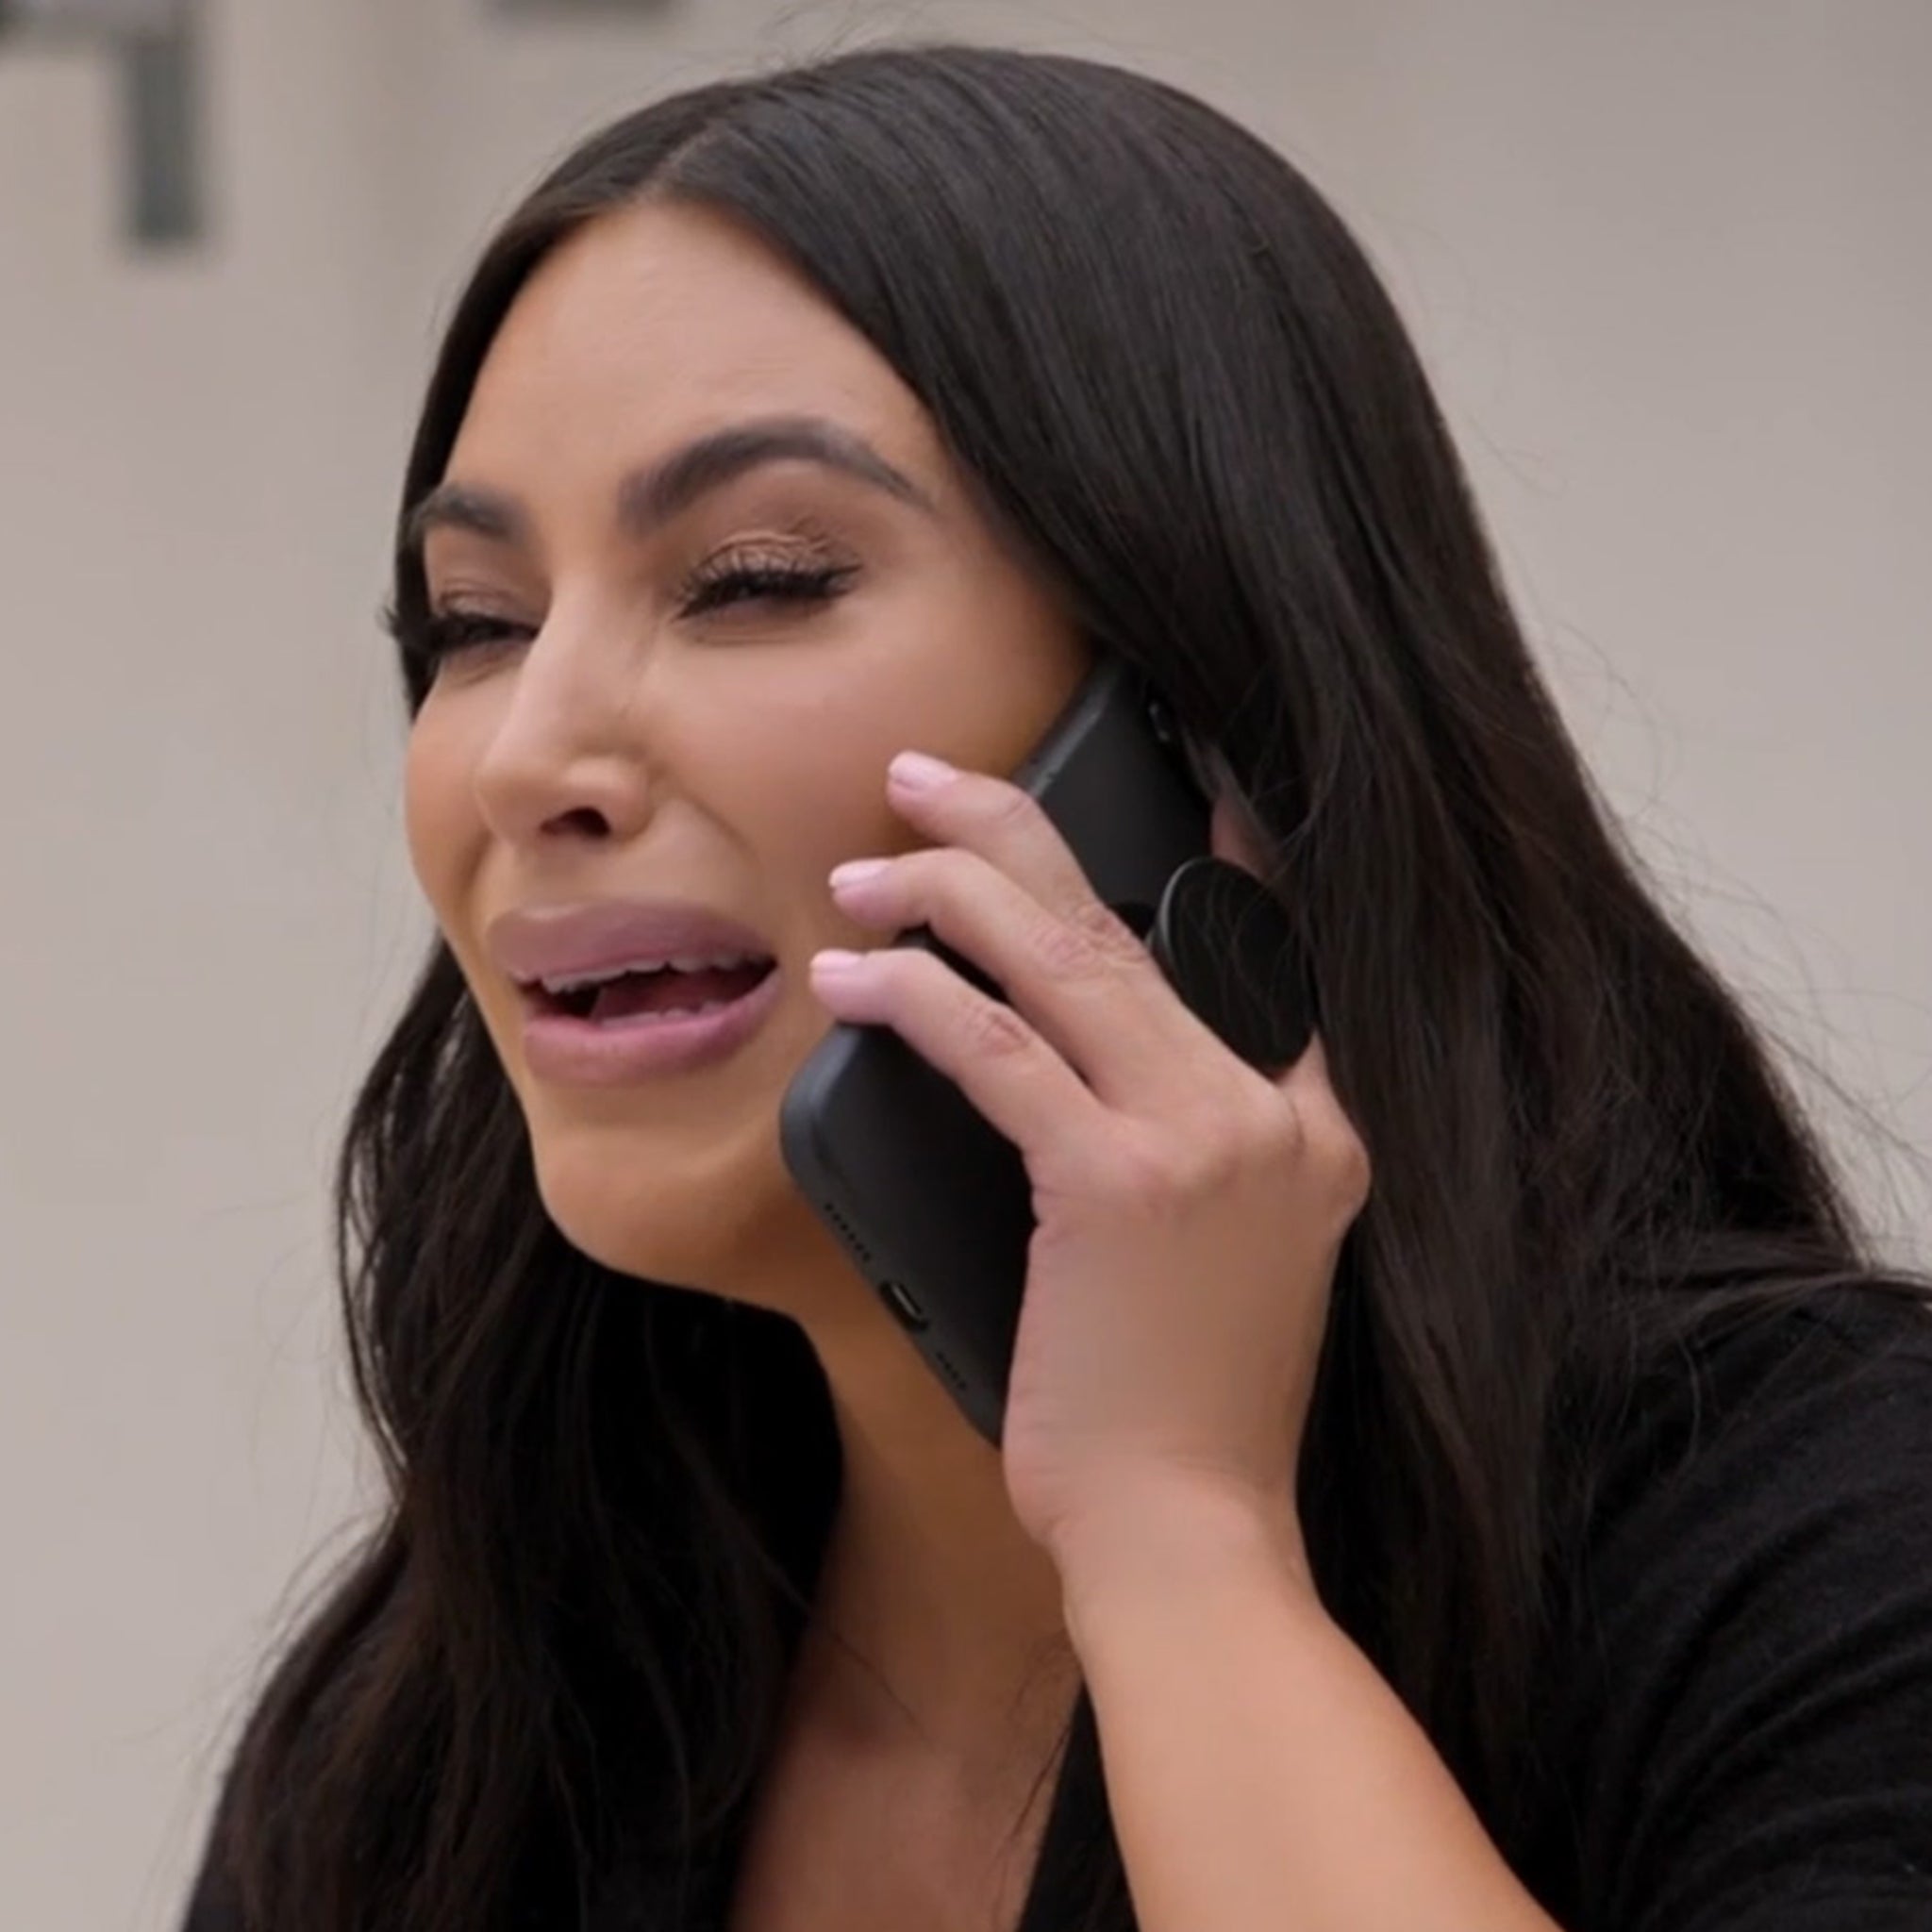 American Hd Sex Video Sliping - Kim Kardashian Sobs Over Sex Tape with Ray J in Graphic Call with Lawyer